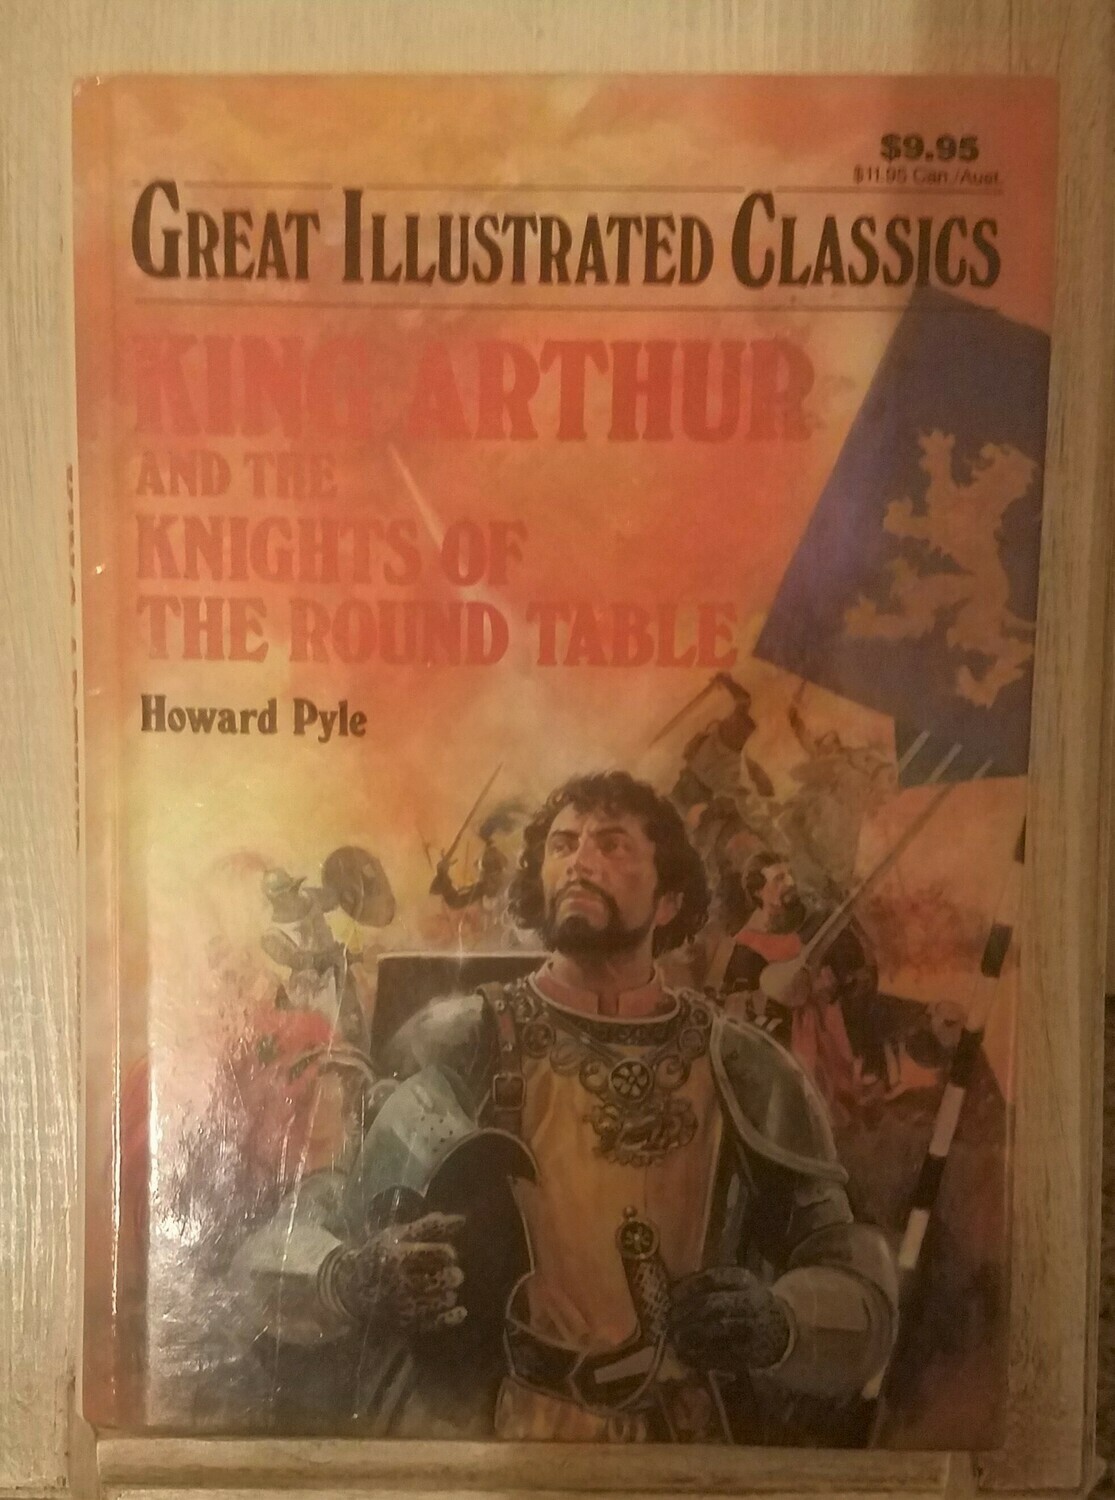 King Arthur and the Kights of the Round Table by Howard Pyle